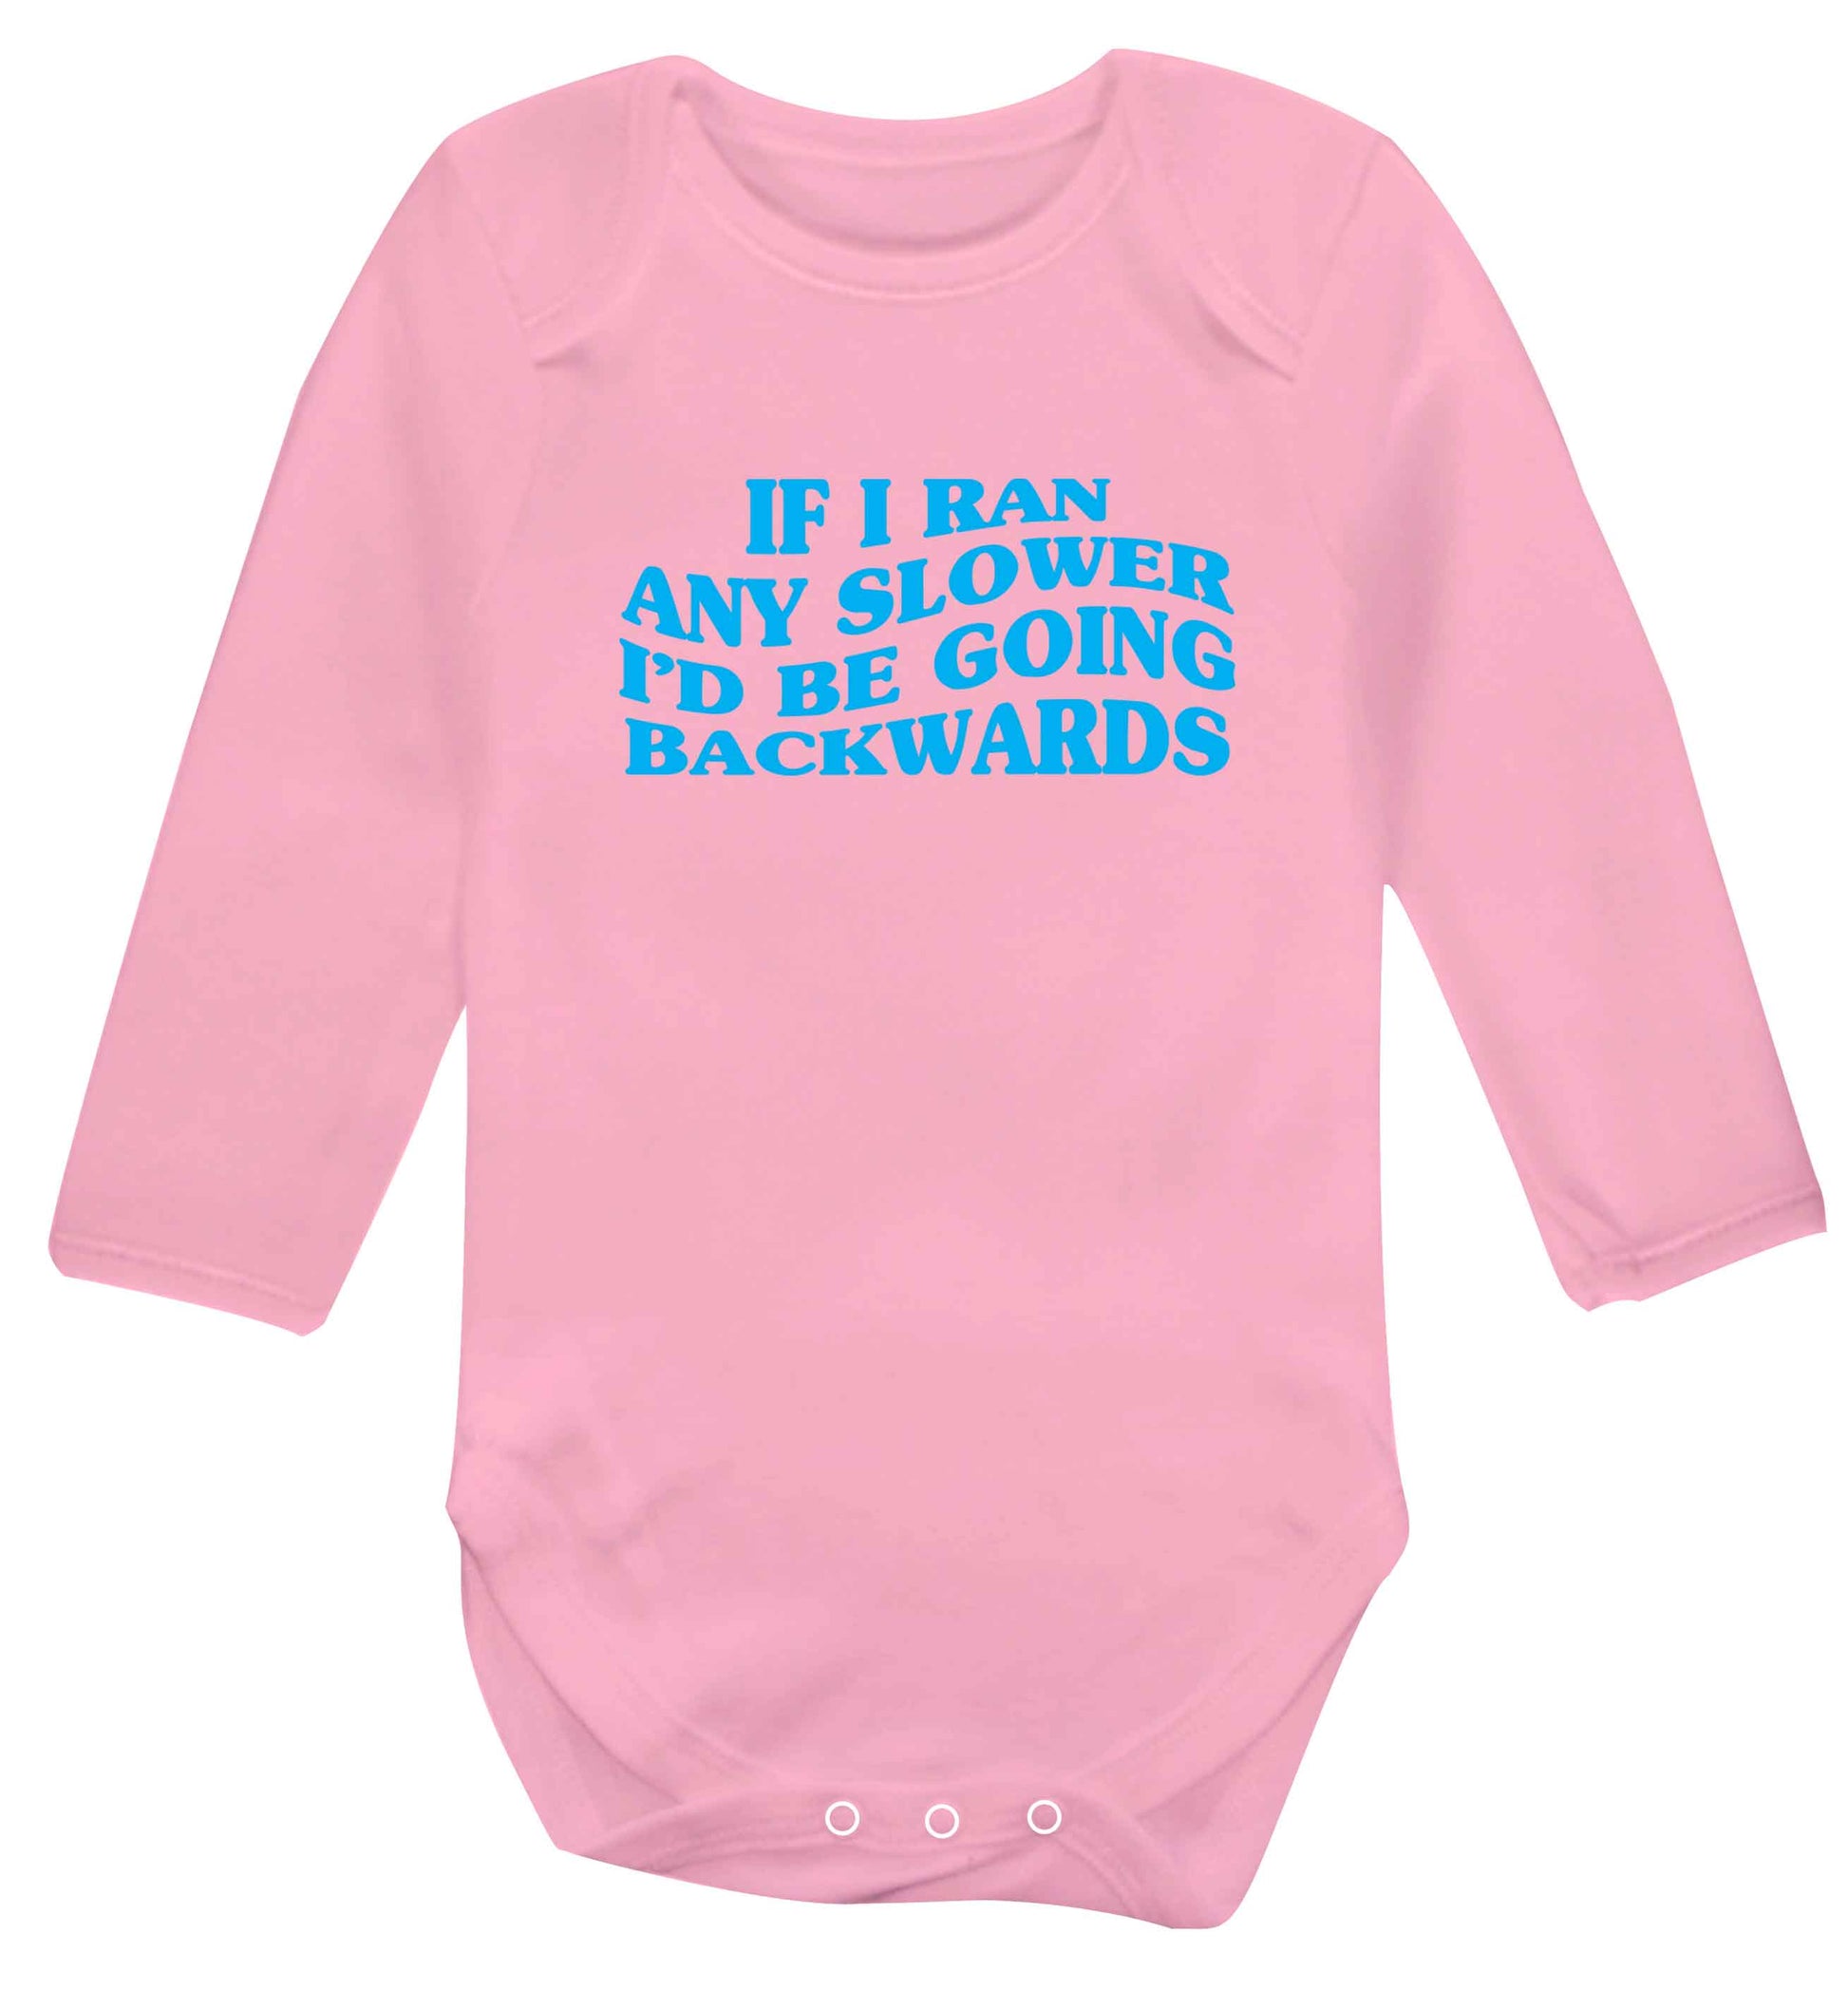 If I ran any slower I'd be going backwards baby vest long sleeved pale pink 6-12 months